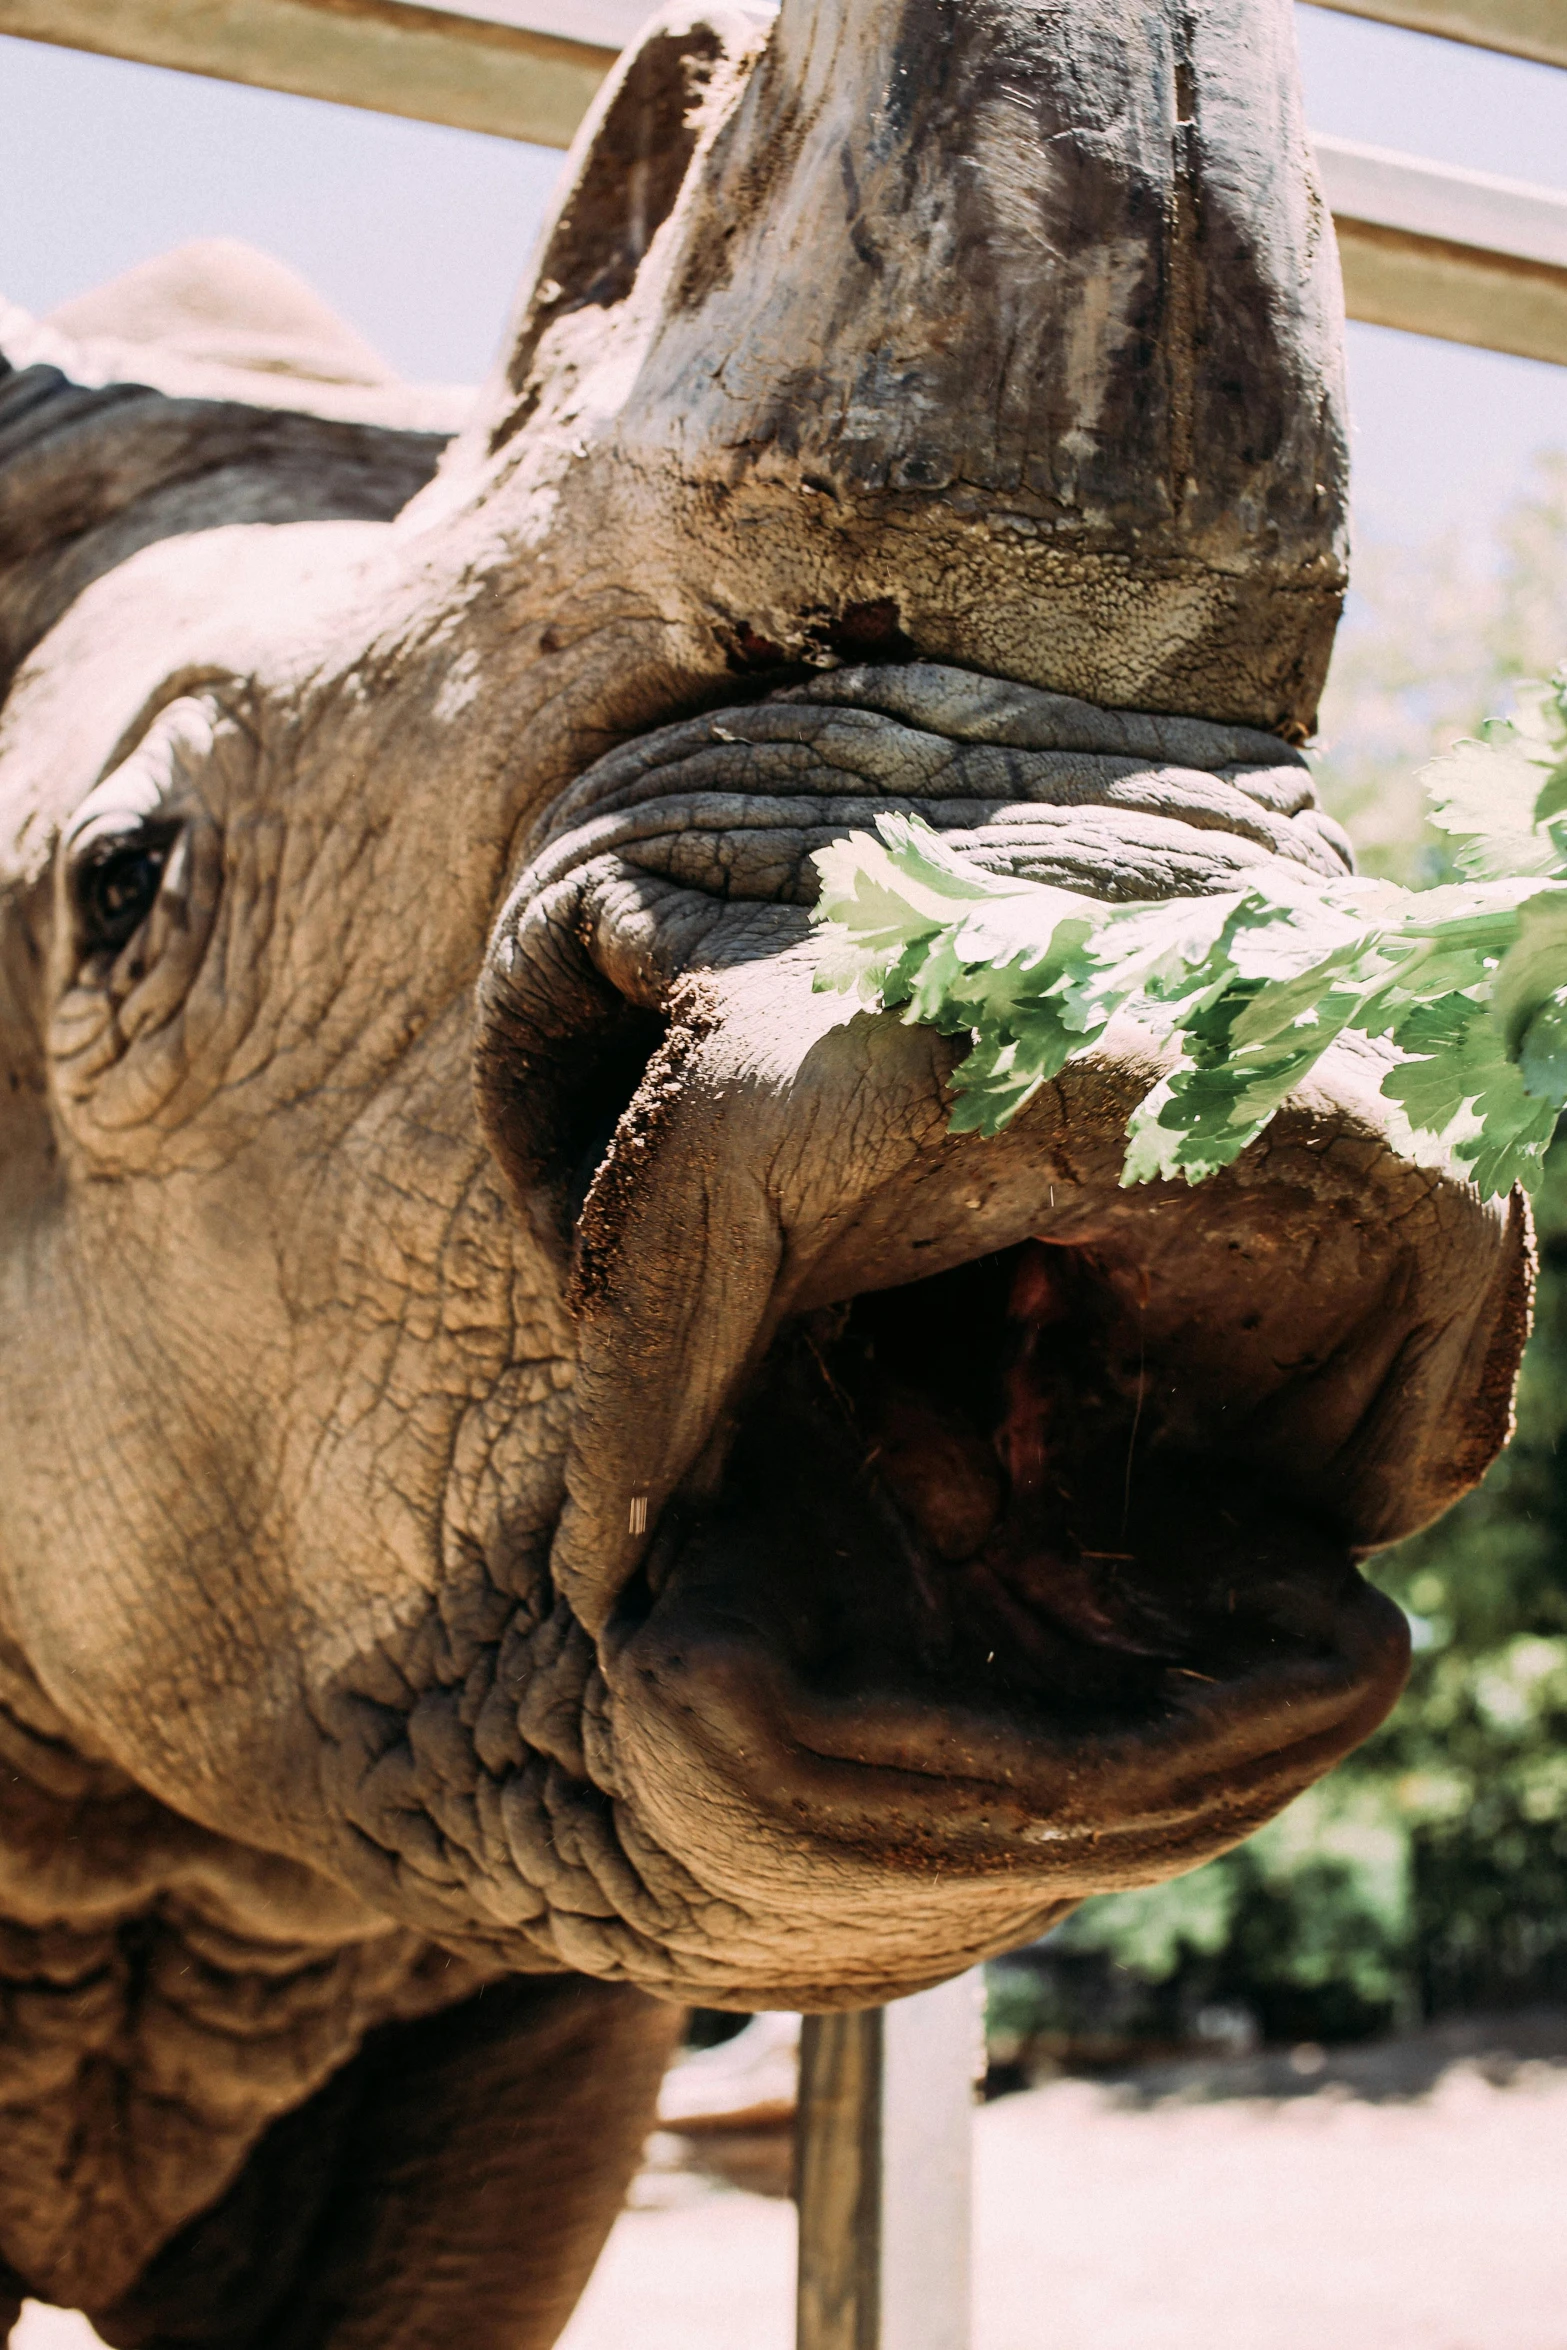 a rhino opening its mouth while eating leaves